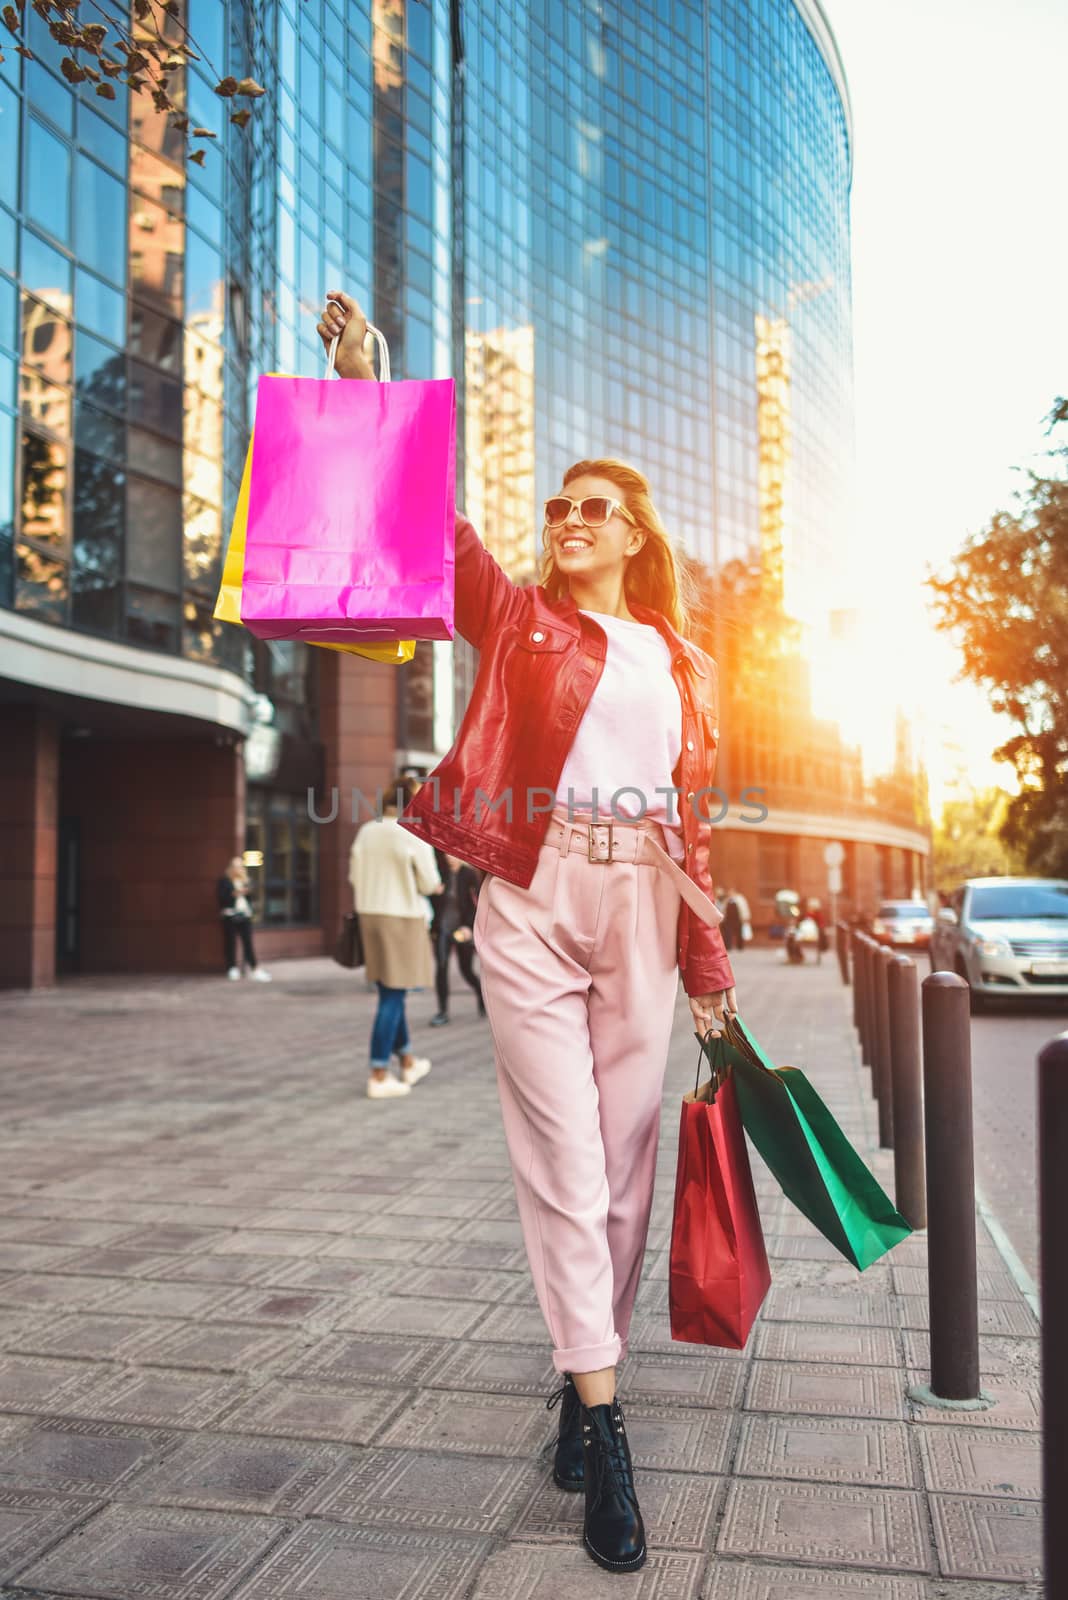 Shopping woman walking outside at street holding shopping bags. Shopper smiling happy walking the street after shopping